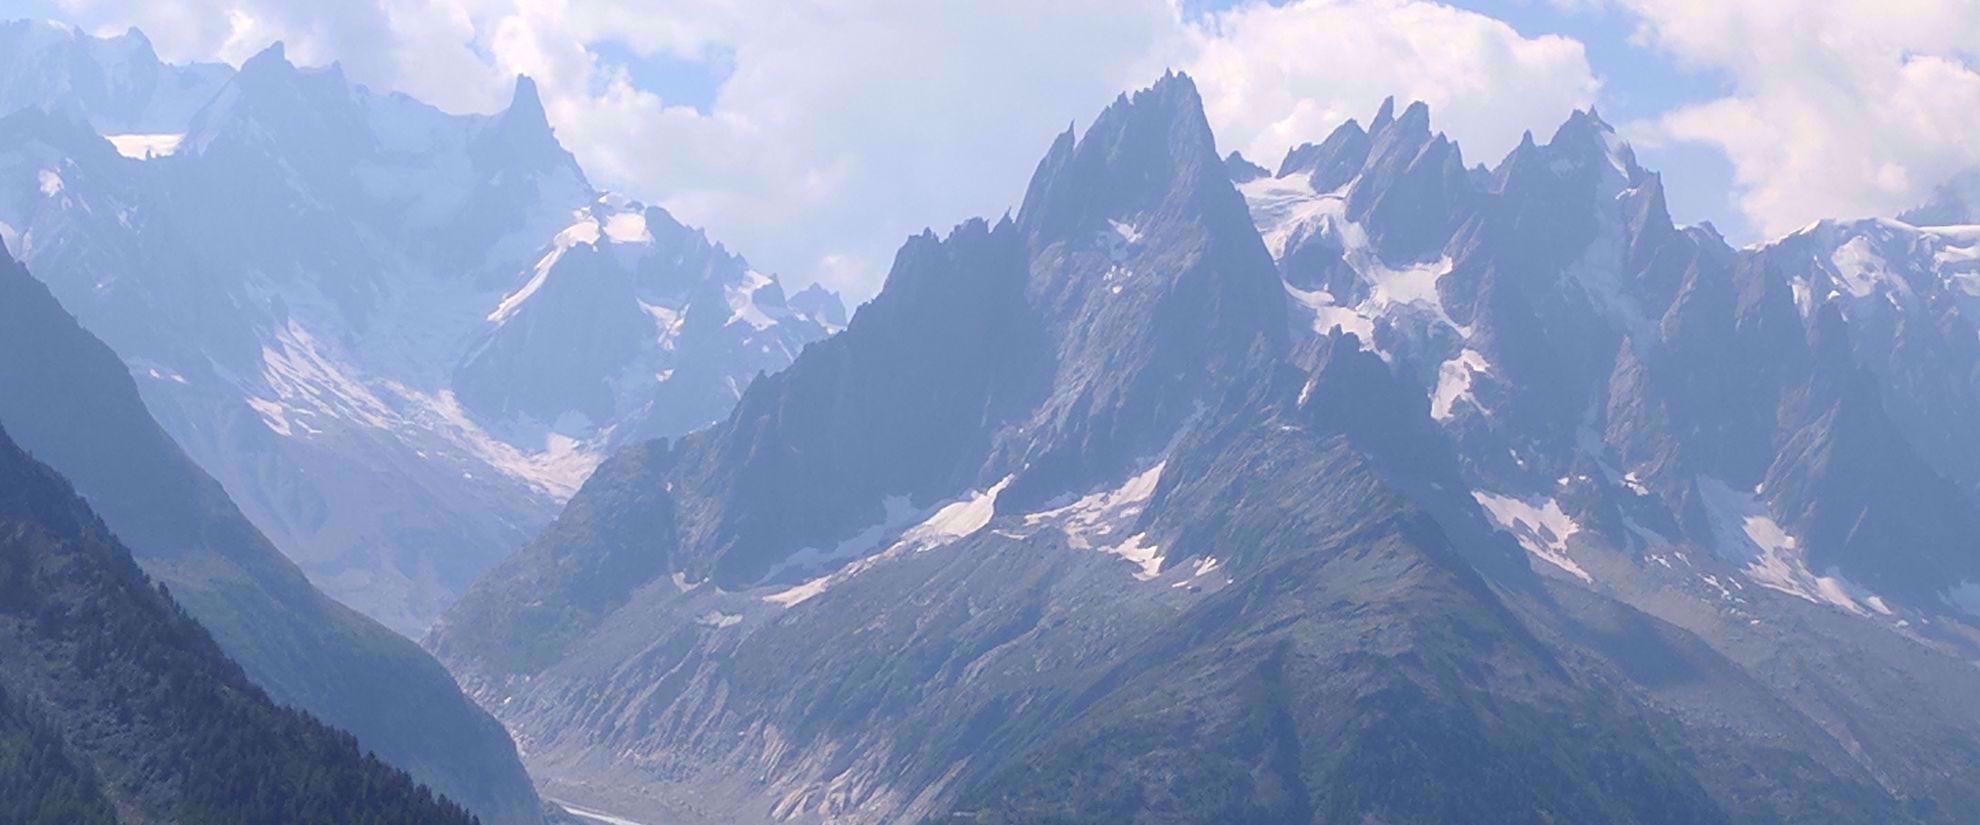 Picture of Tour du Mont Blanc Highlights